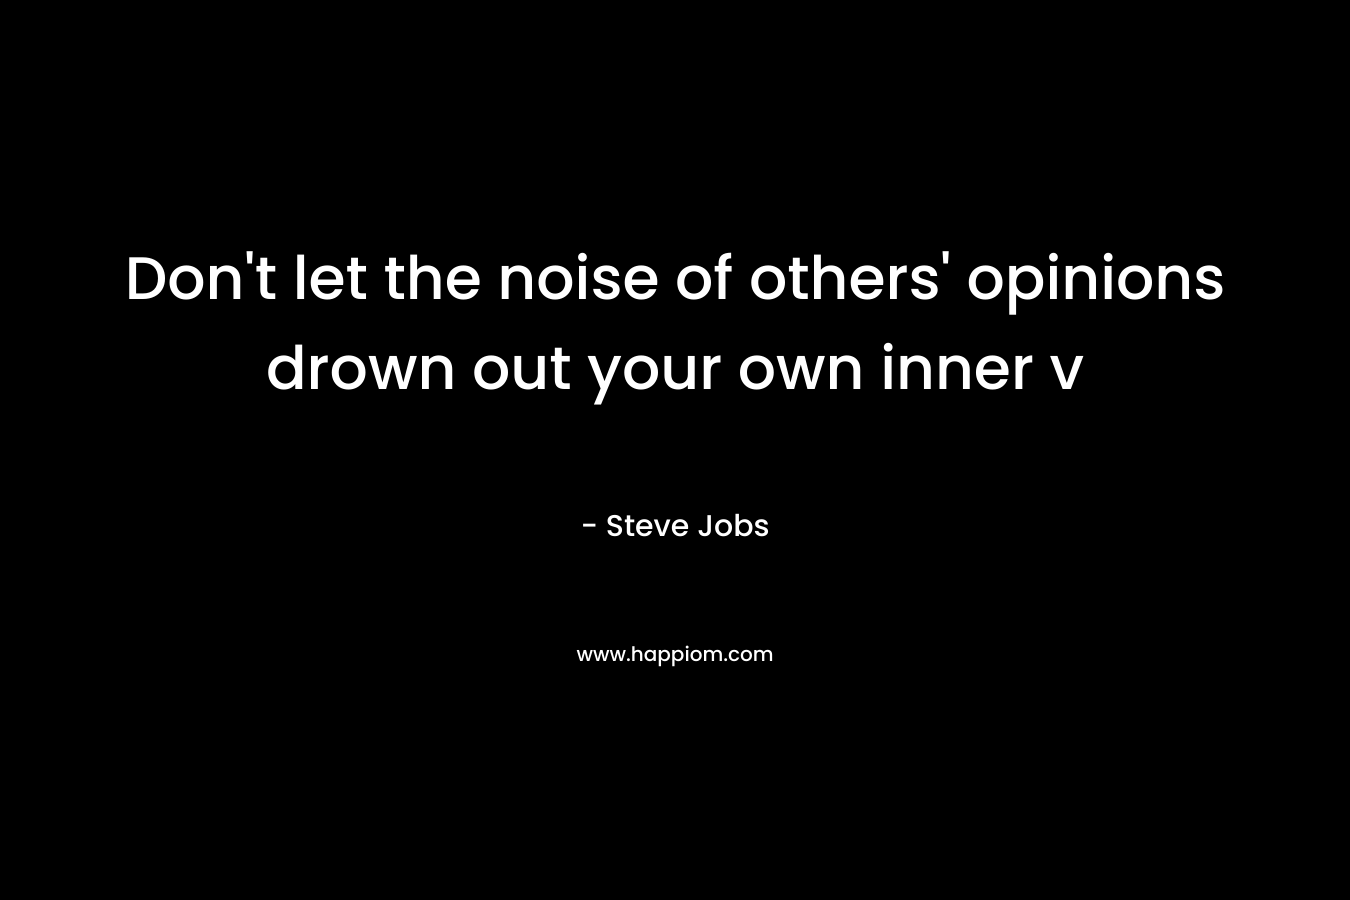 Don't let the noise of others' opinions drown out your own inner v